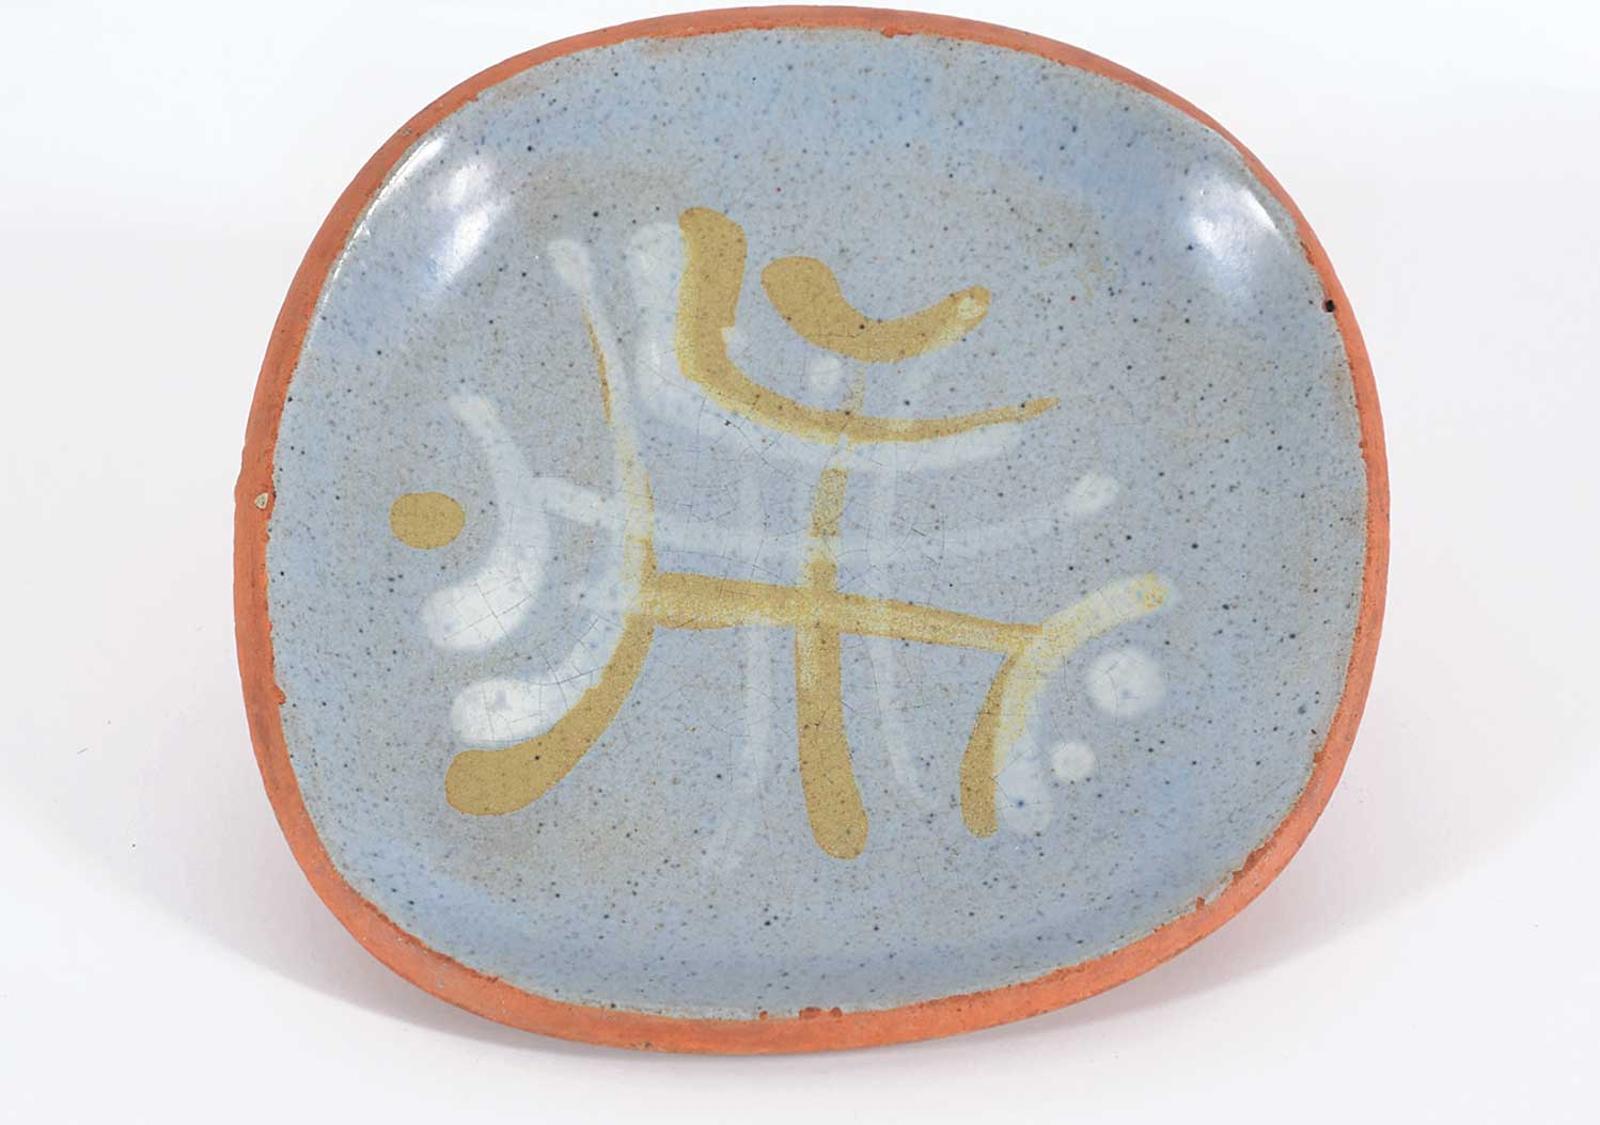 Katie von der Ohe (1937) - Untitled - Small Dish with White and Yellow Figures